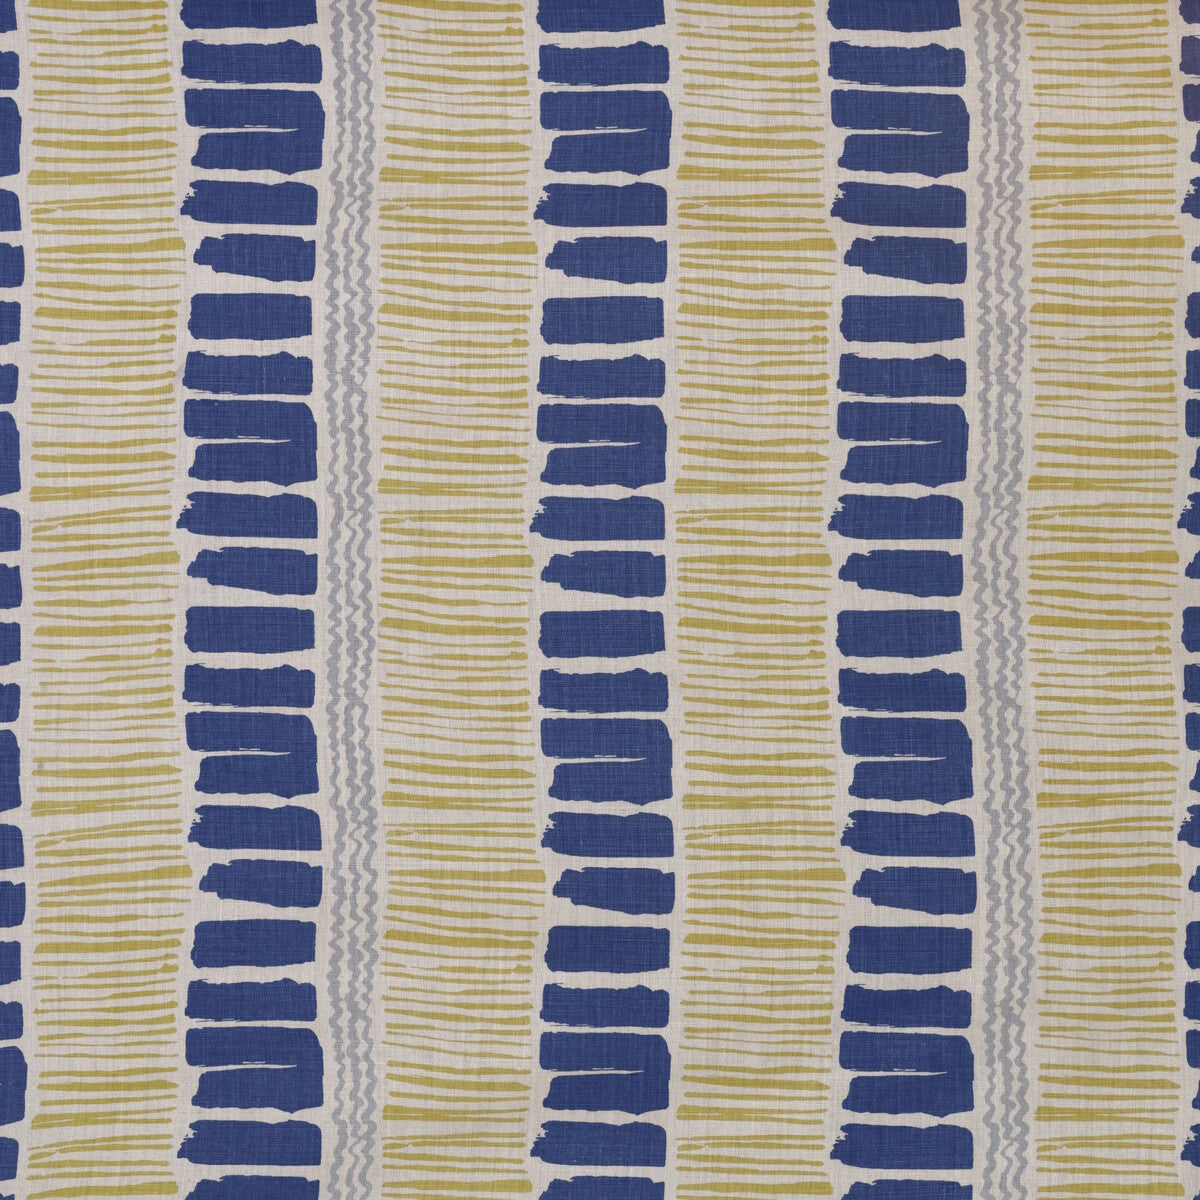 Saltaire fabric in indigo/yellow/aqua color - pattern BFC-3624.450.0 - by Lee Jofa in the Blithfield collection